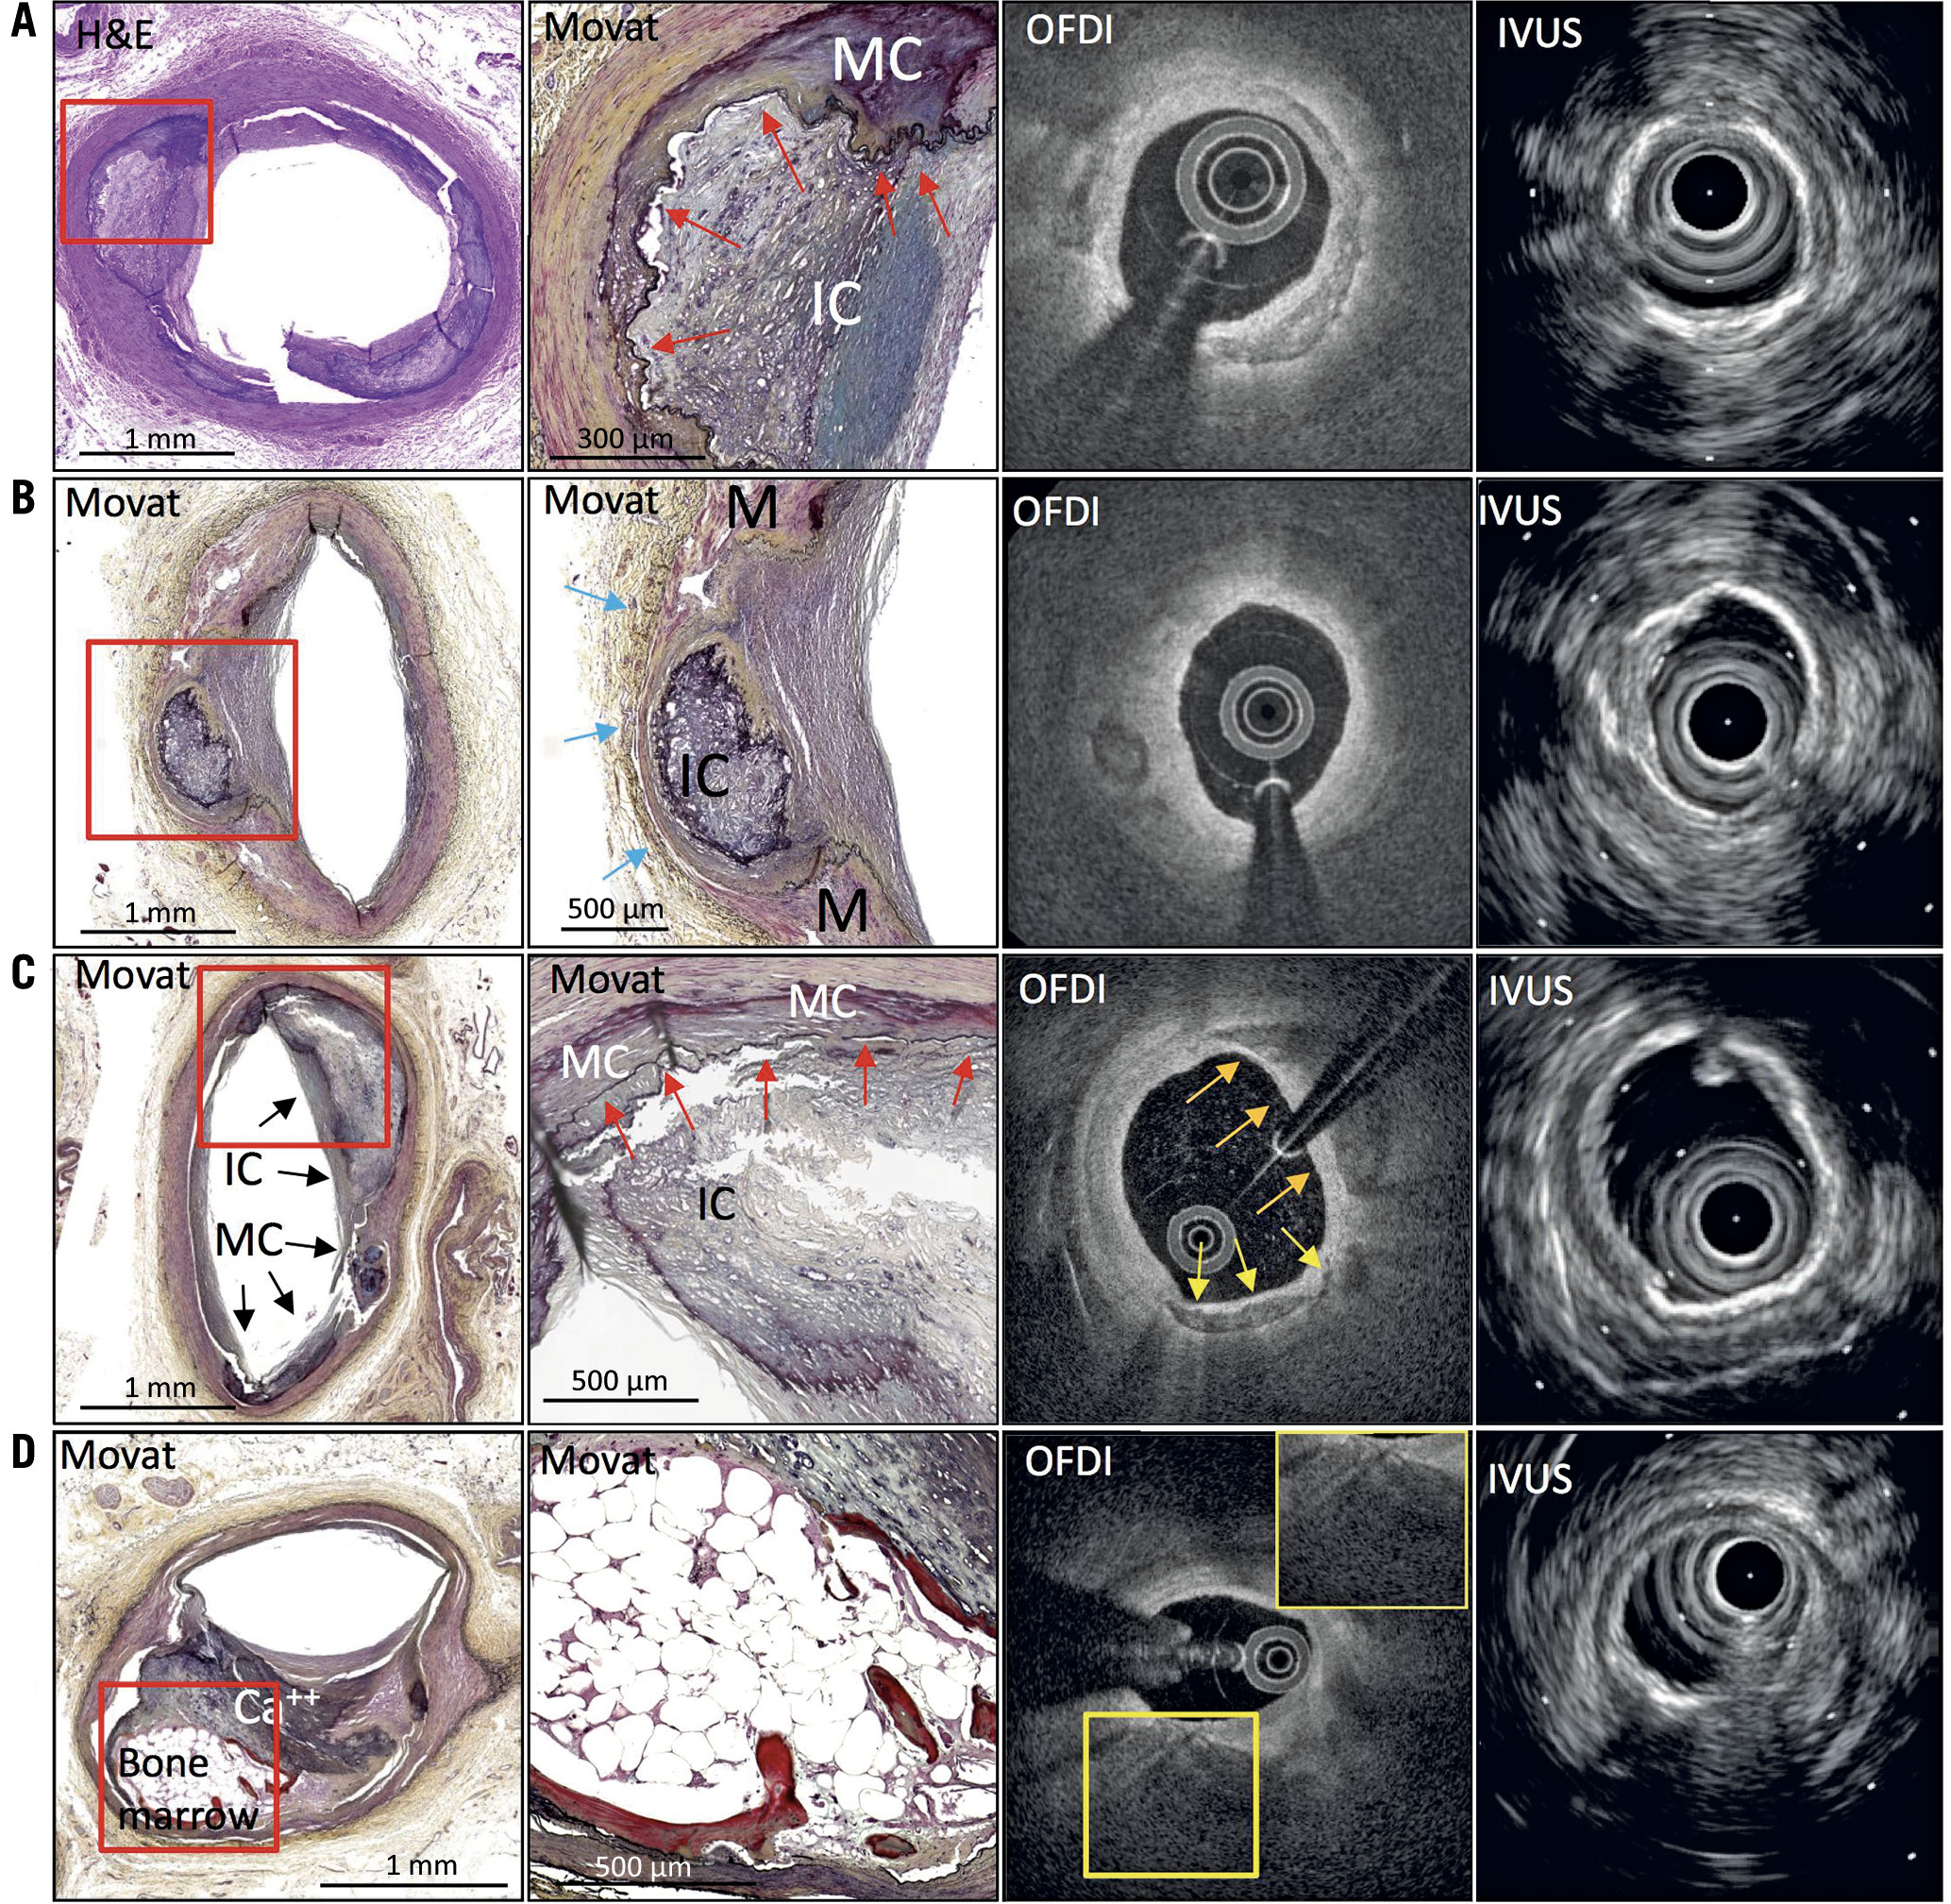 Figure 5. Misreading cases of medial calcification and bone formation. The left panels in histology show low-power images and the adjacent panels show high-power images from the red boxes. A) Fusion calcification. Intimal (IC) and medial calcification (MC) are connected over internal elastic lamina (red arrows). OFDI shows calcification in intima and IVUS shows high echoic signal with acoustic shadow within the intima. B) Medial thinning from intimal calcification. Intimal calcification invades the medial wall where the media (M) becomes thin and is almost absent (blue arrows). OFDI shows calcification located deep in the intima, and IVUS shows high echoic signal near the intima-media border. C) Intimal and medial calcifications are located side by side. The high-power images show that the IC and MC are connected over internal elastic lamina (red arrows). OFDI shows likely intimal calcification (orange arrows) and medial calcification (yellow arrows). IVUS shows likely medial calcification. D) Histological image shows bone formation with overlying thick calcification (Ca++). OFDI shows thick calcification. It is difficult to observe the deeper area due to attenuation from thick calcification. IVUS shows high echoic signal at the luminal surface. IVUS: intravascular ultrasound; OFDI: optical frequency domain imaging